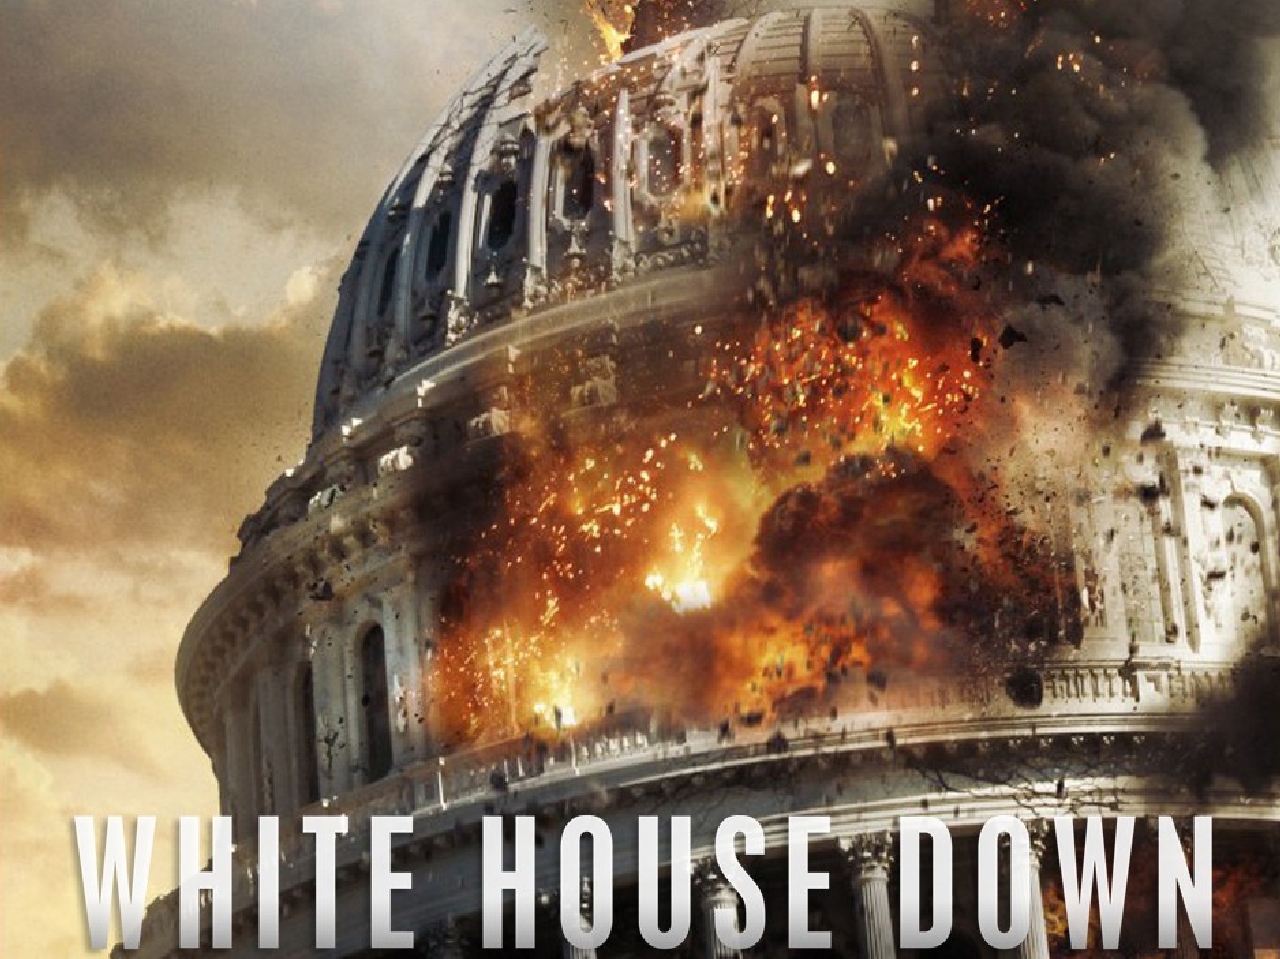 White House Down Computer Wallpapers Desktop Backgrounds 1280x959 1280x959